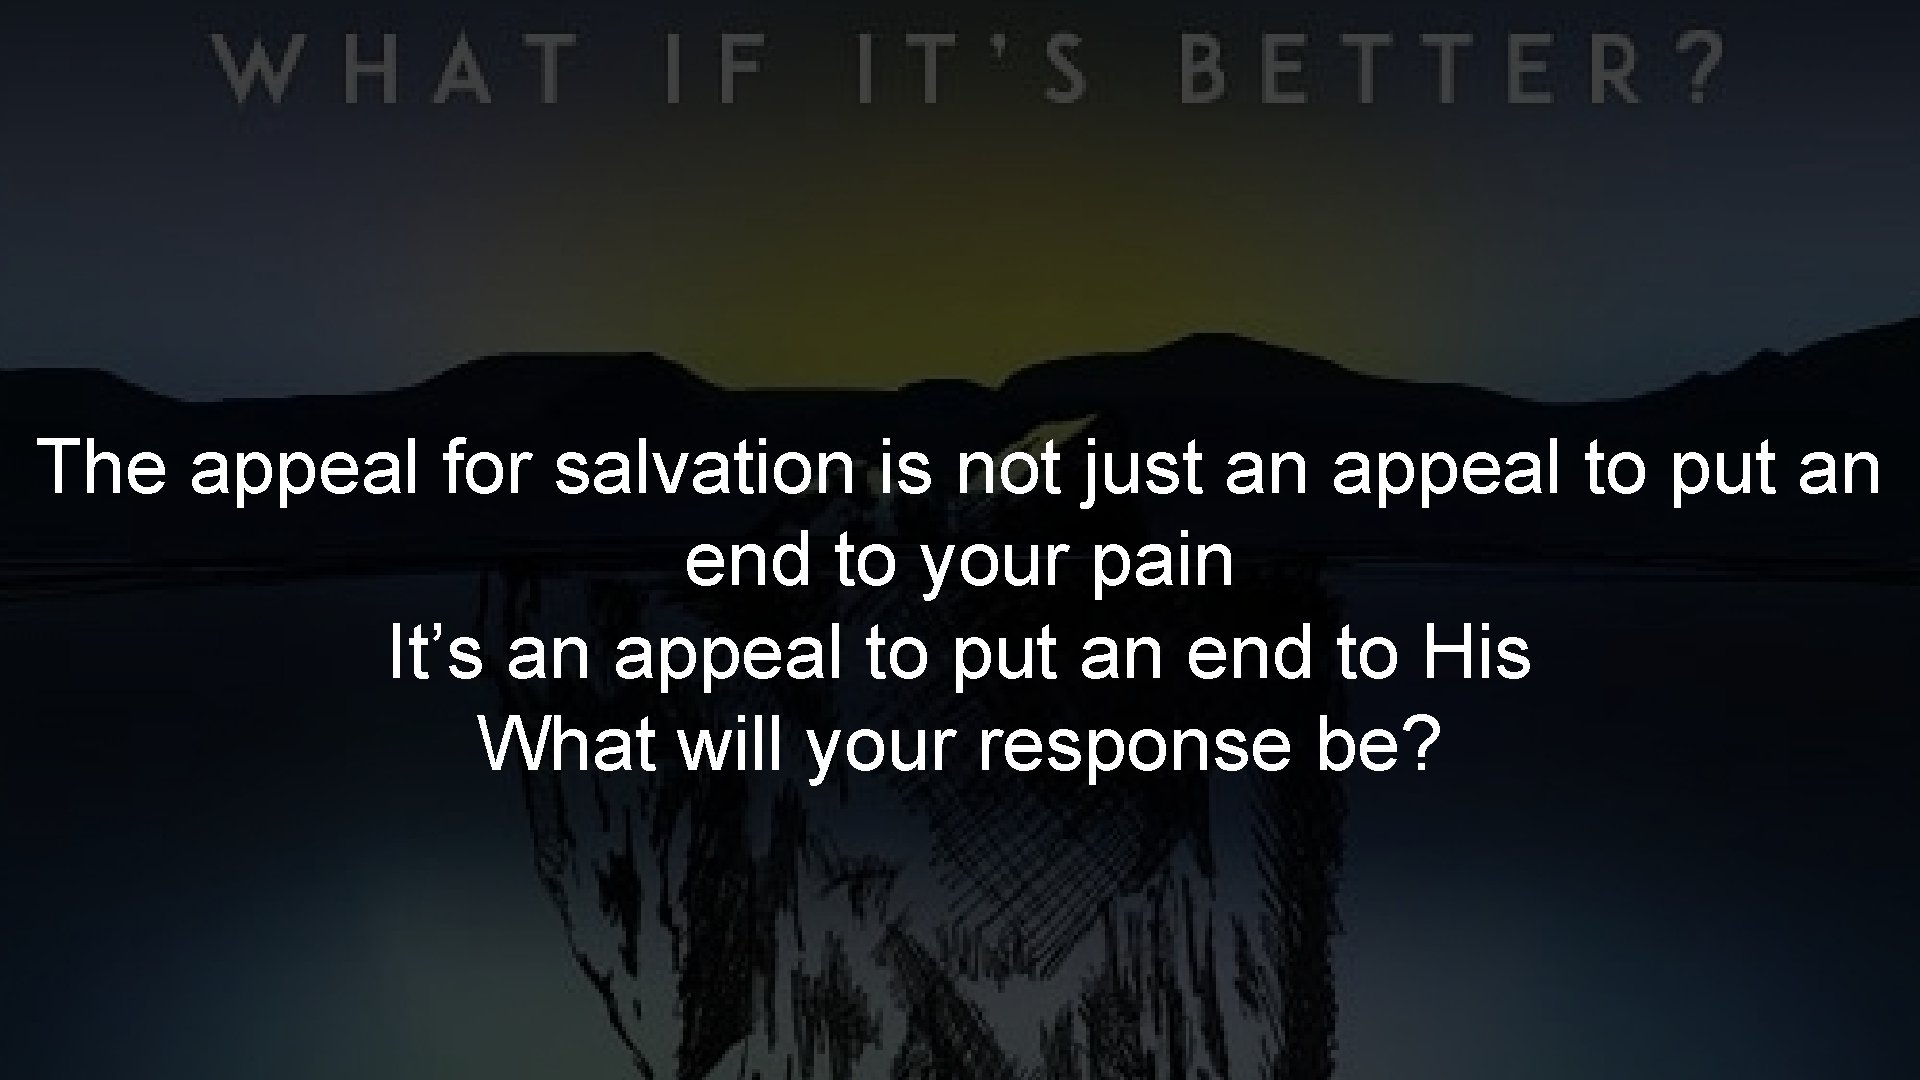 The appeal for salvation is not just an appeal to put an end to